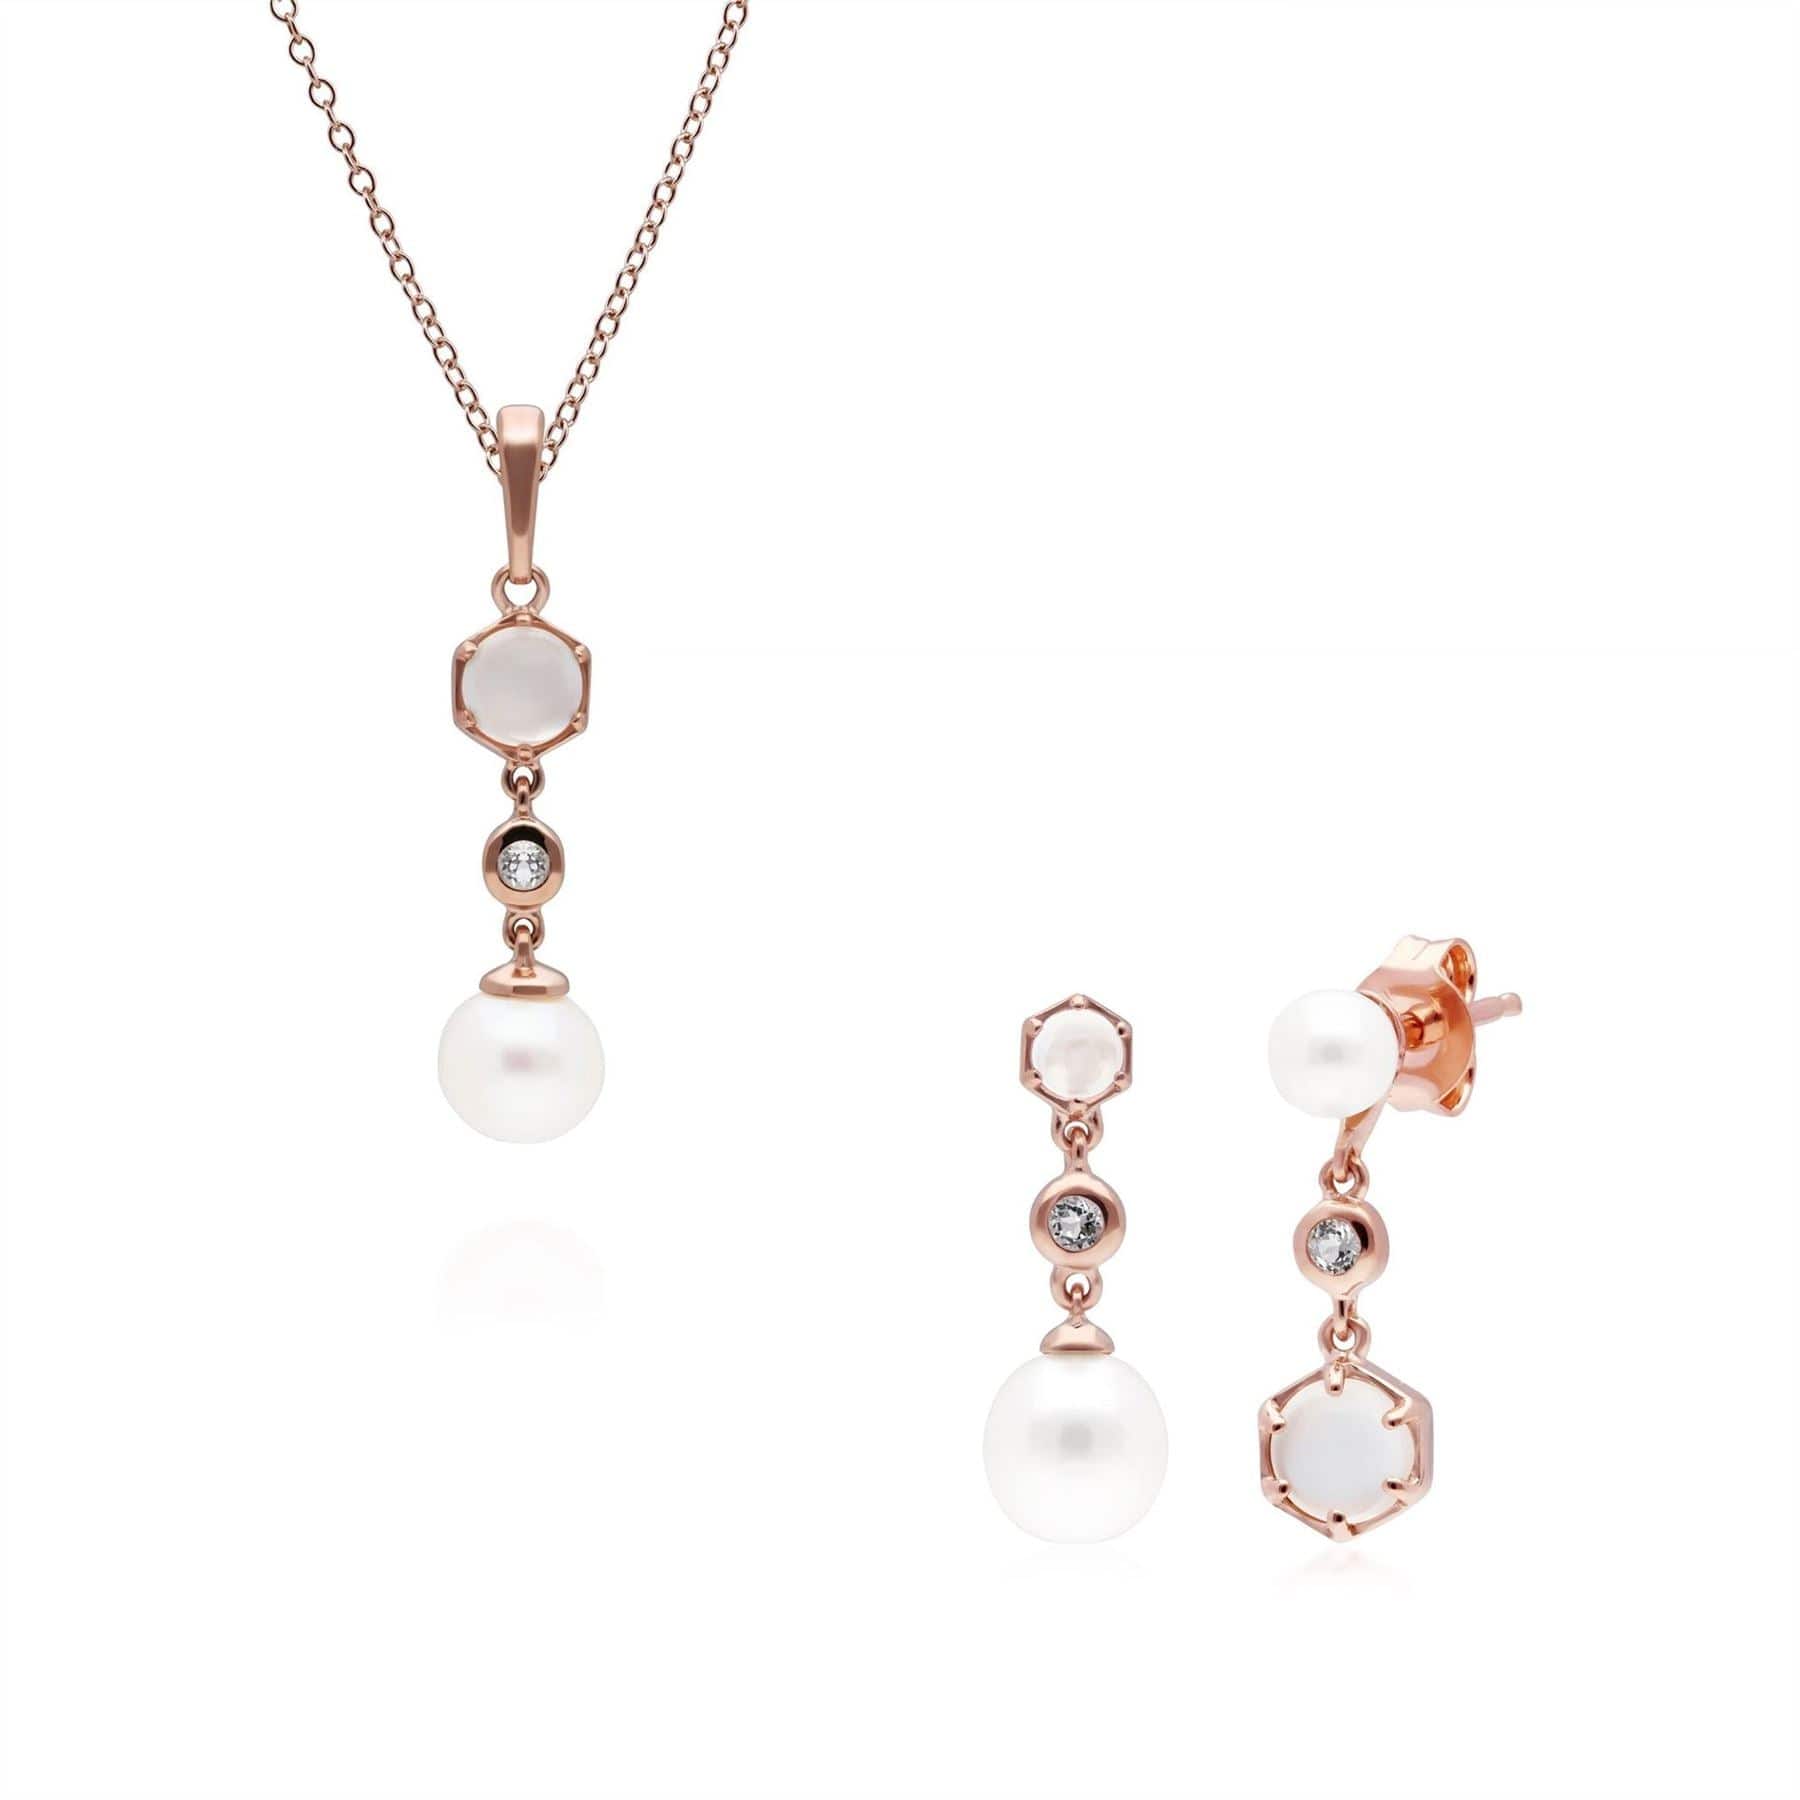 270P030702925-270E030902925 Modern Pearl, Moonstone & Topaz Pendant & Drop Earring Set in Rose Gold Plated Silver 1